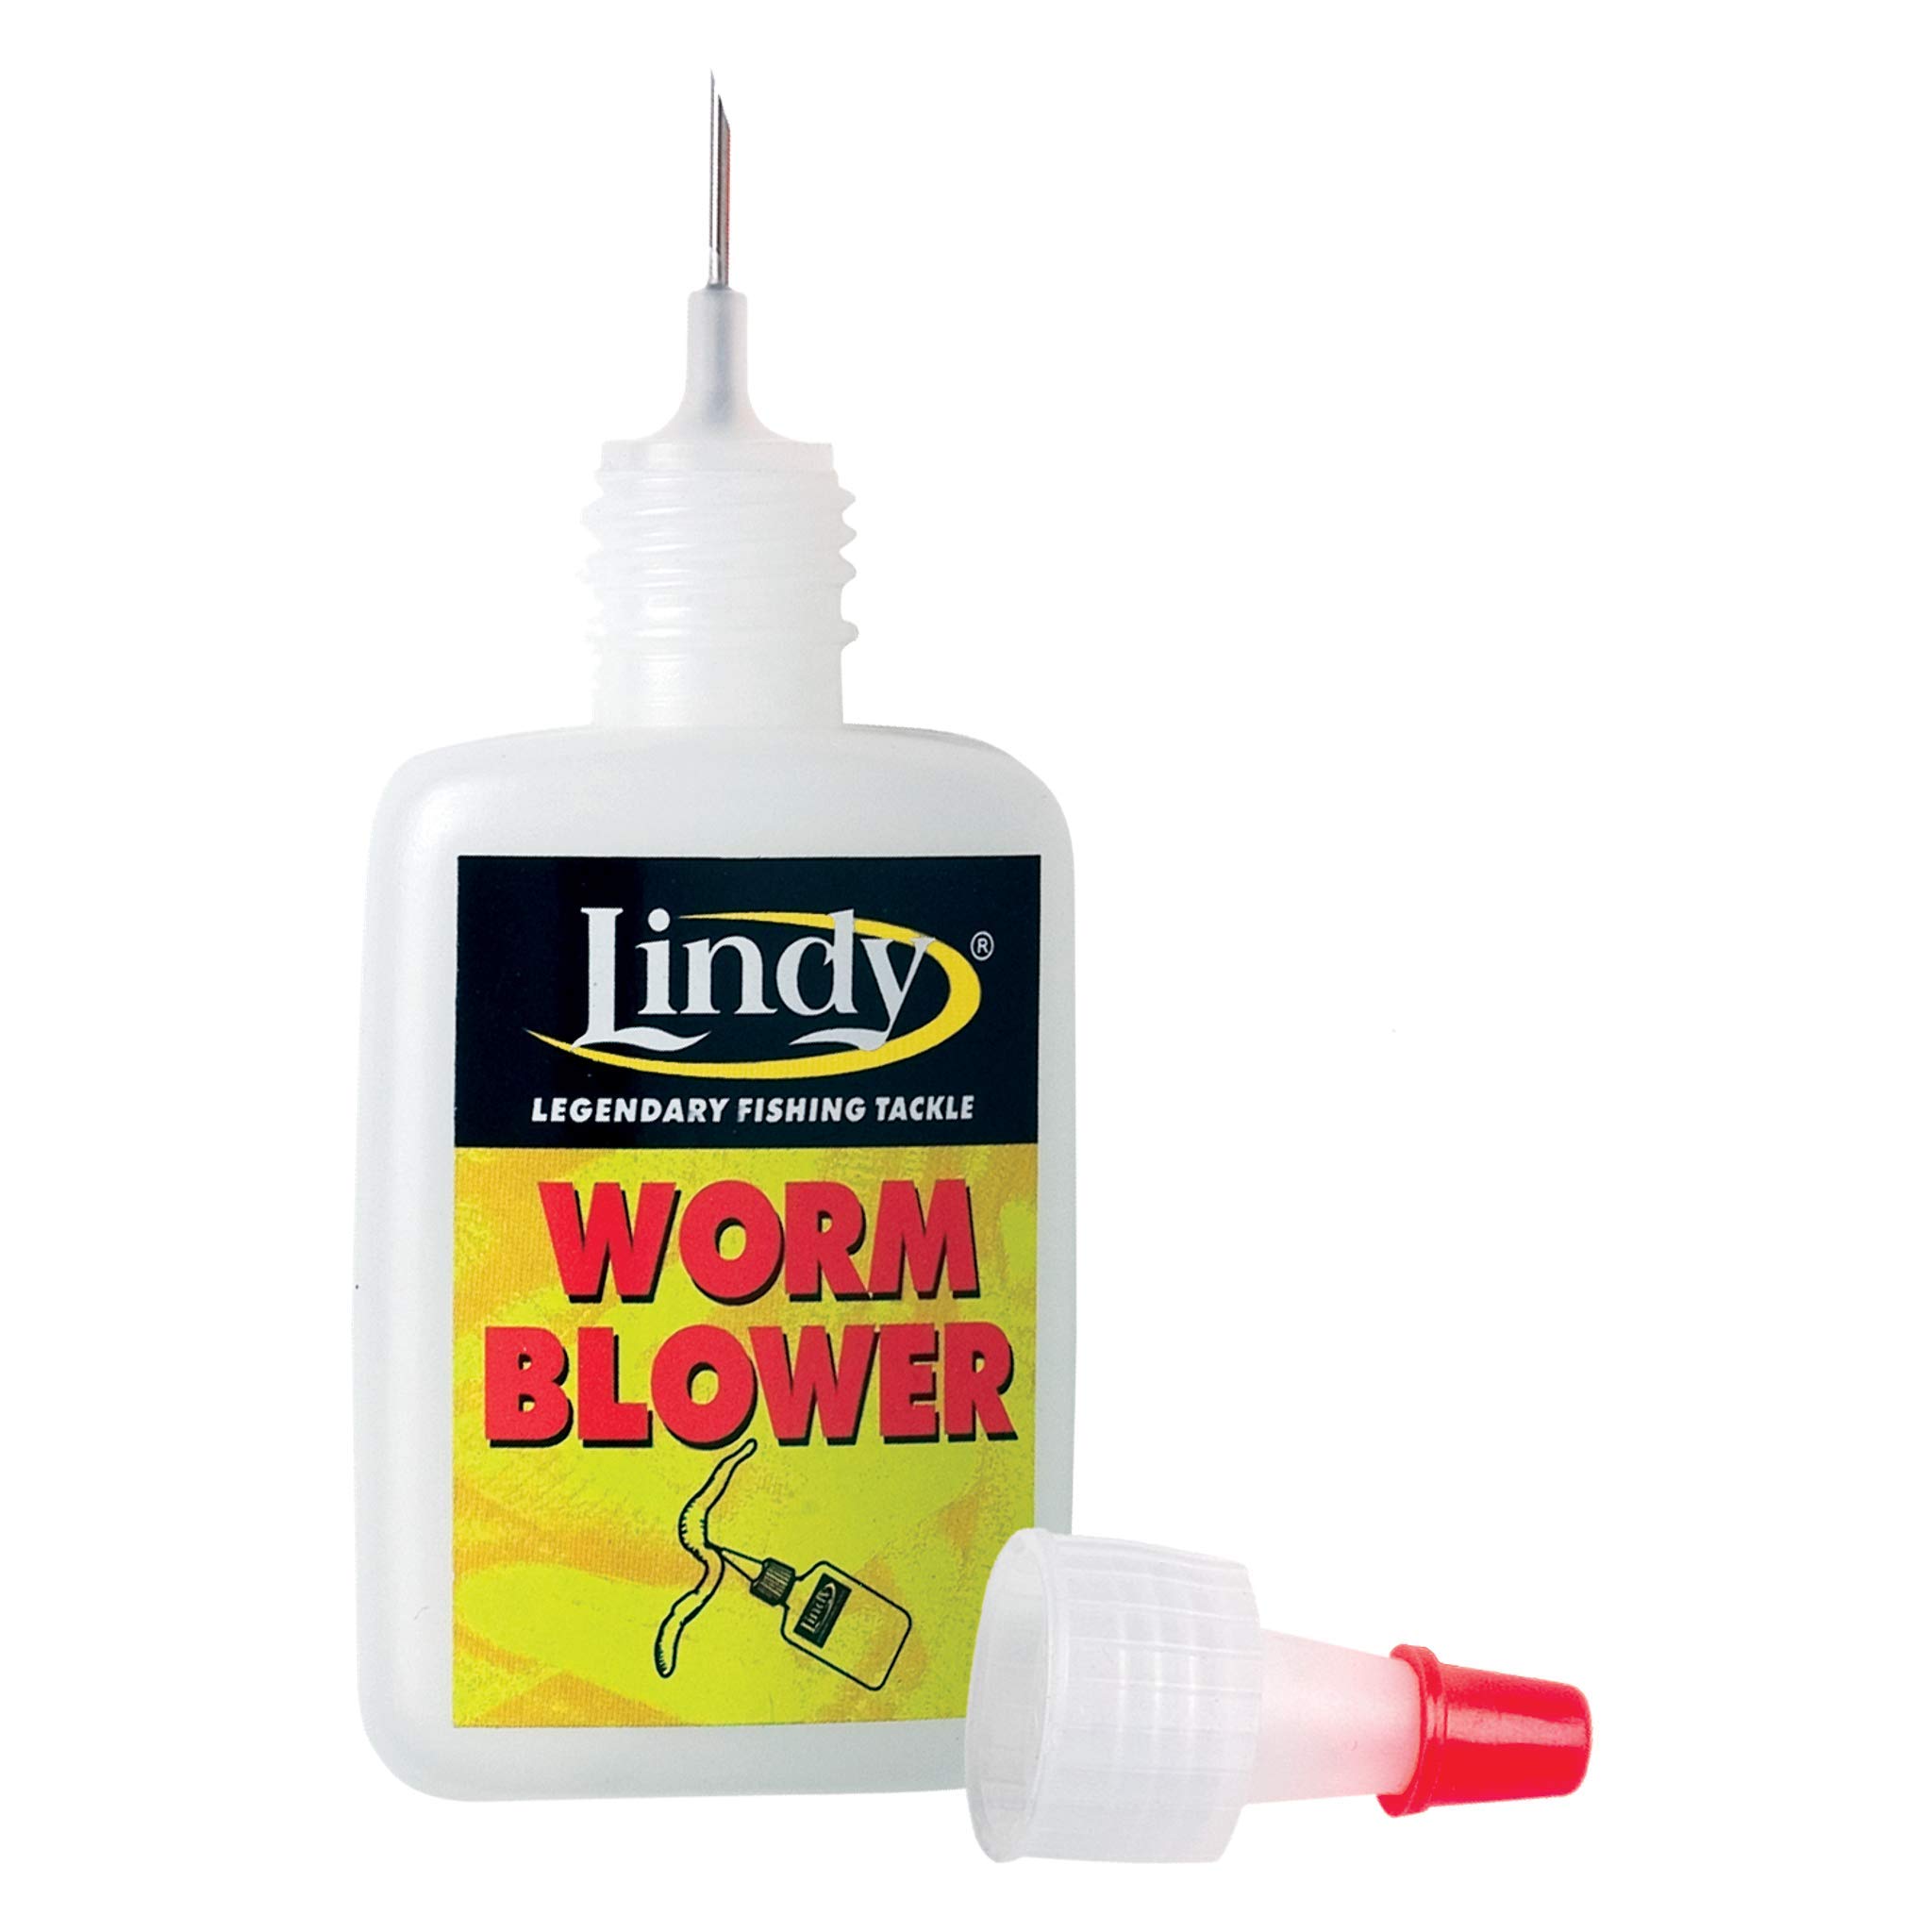 Lindy Worm Blower (One Size) $2.29 @ Amazon